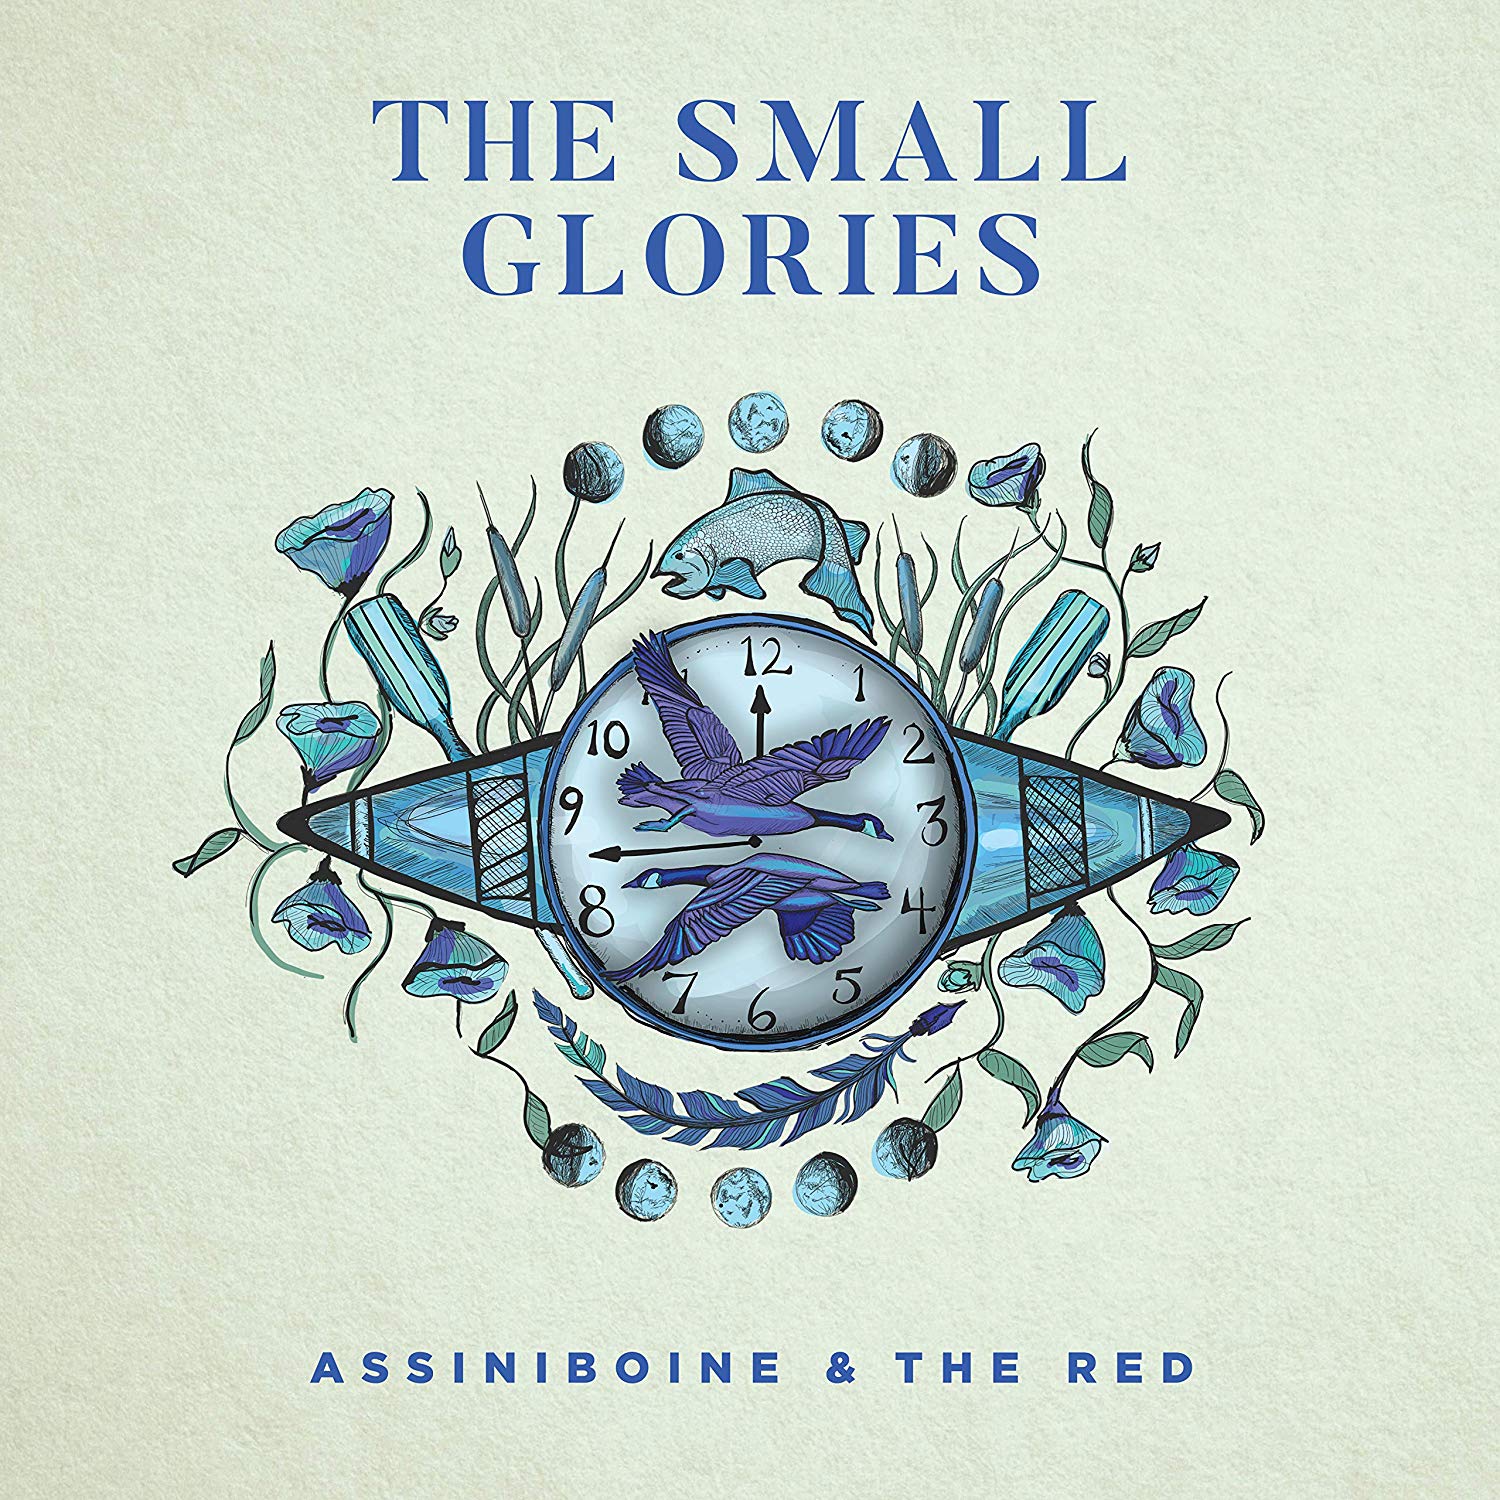 The Small Glories: Assiniboine & The Red